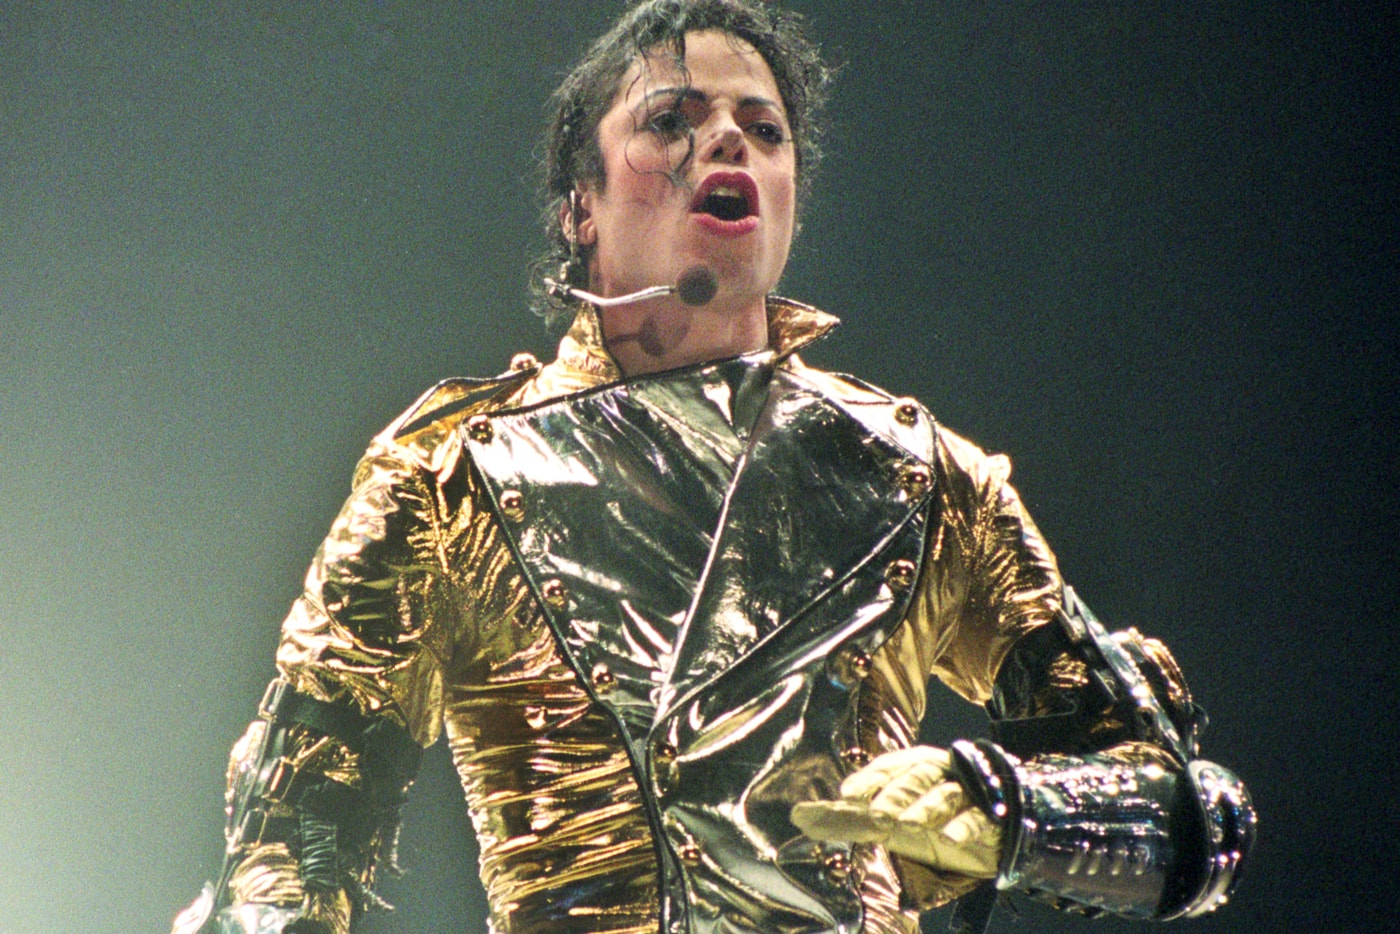 sony-buy-out-michael-jackson-estate-for-music-publishing-unit